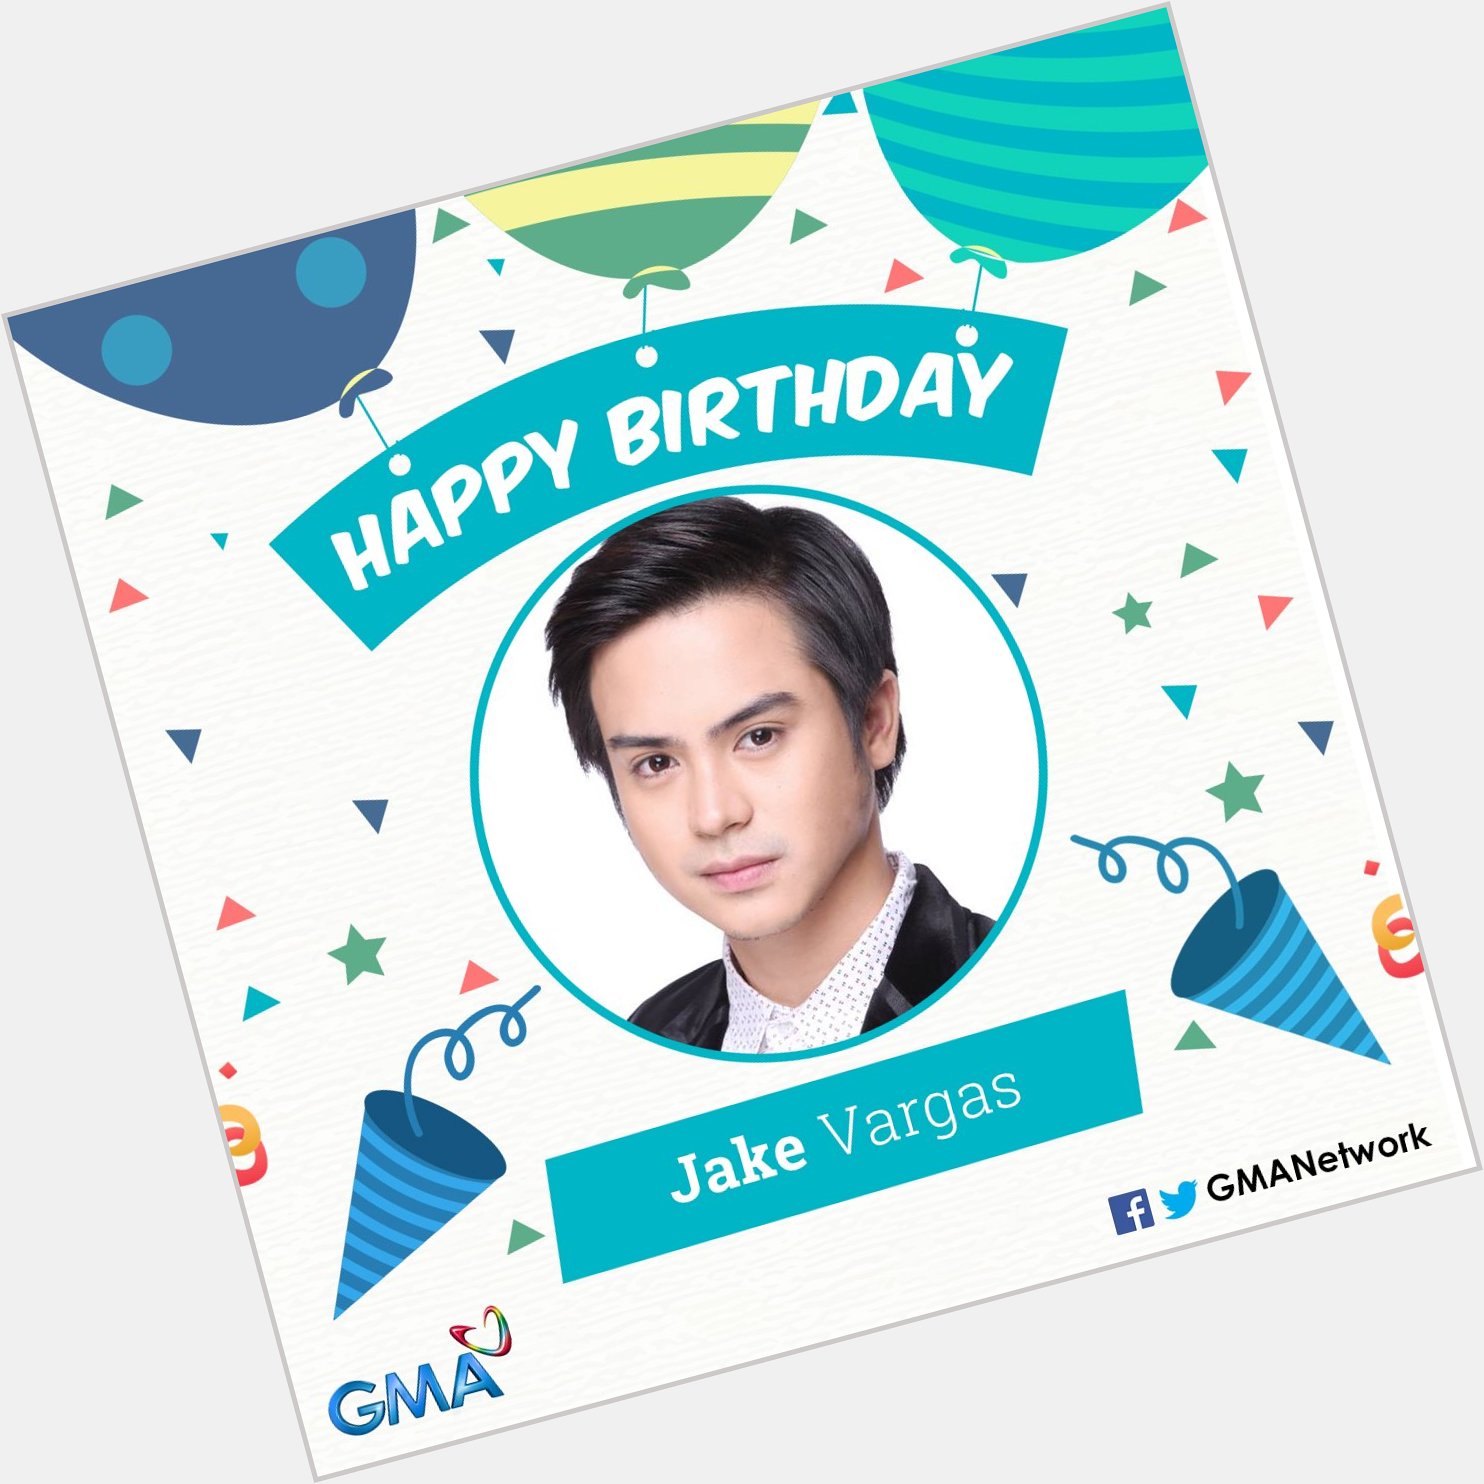 Happy birthday to our Kapuso, Jake Vargas! 

Wishing you nothing but love and happiness today and everyday! 